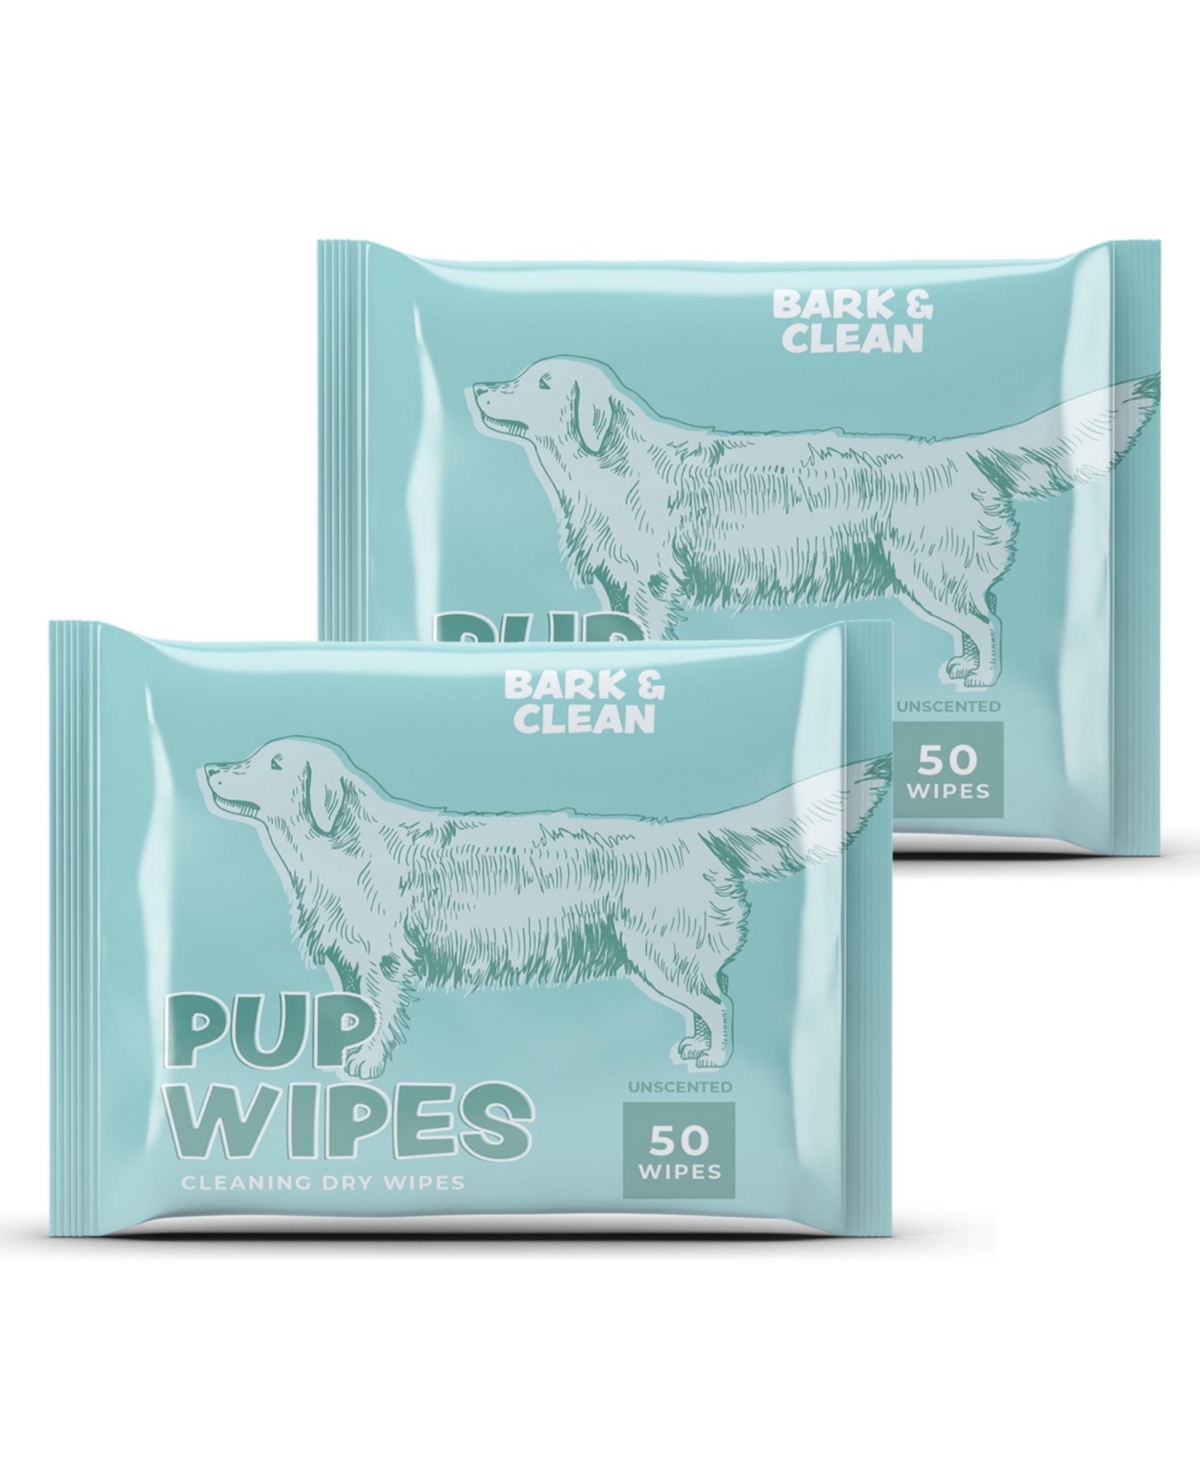 Dry Unscented Pup-Wipes for Dog Cleanliness - 2 Boxes of 50 Wipes